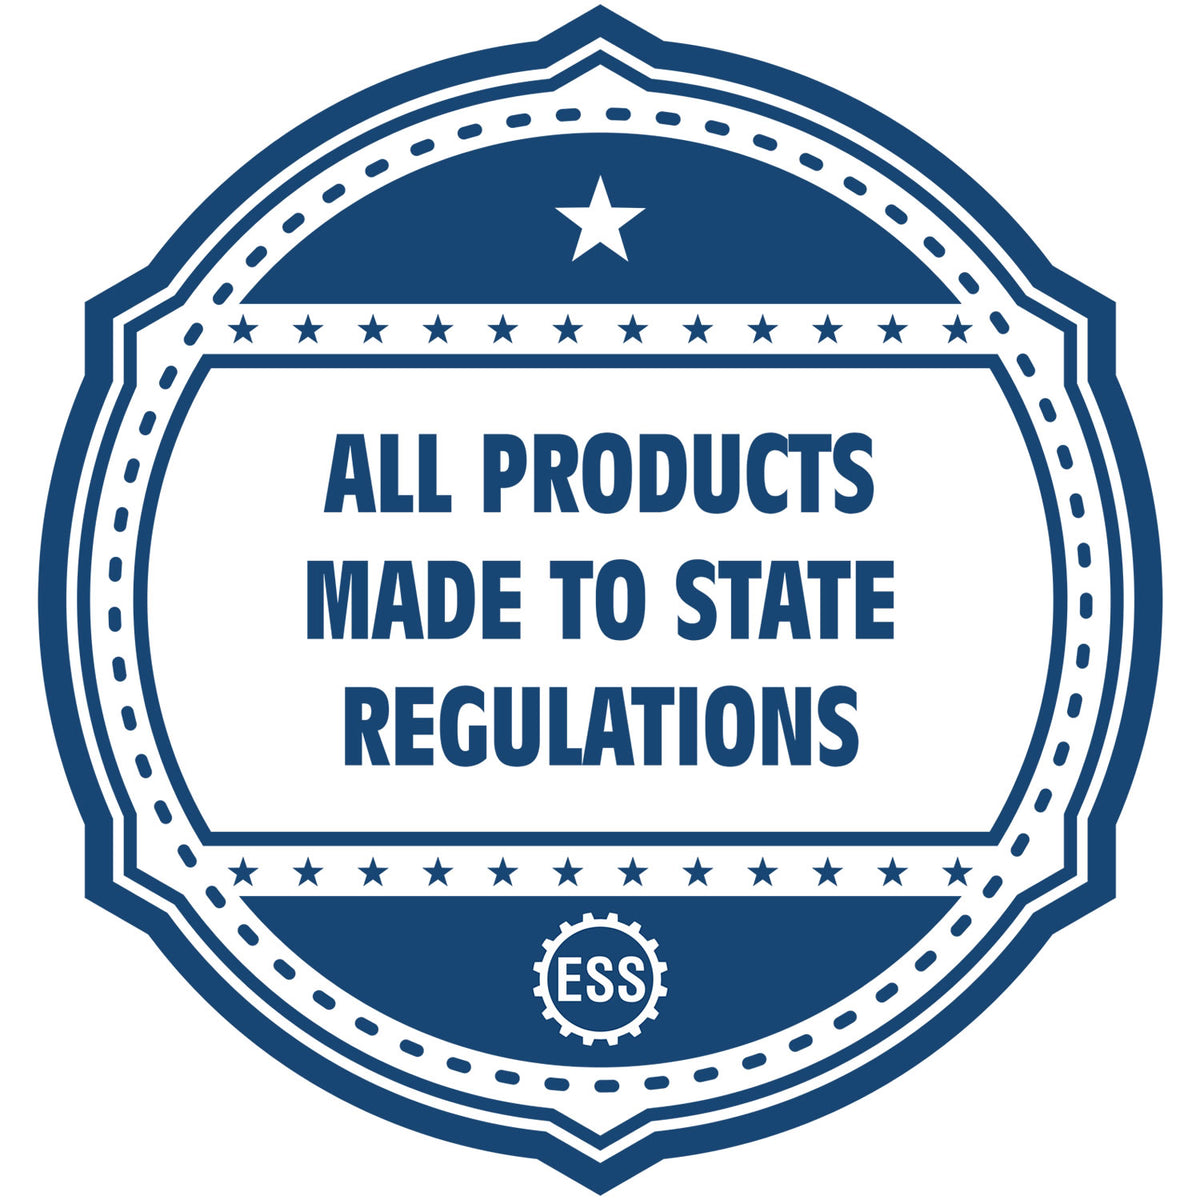 An icon or badge element for the Slim Pre-Inked Georgia Land Surveyor Seal Stamp showing that this product is made in compliance with state regulations.